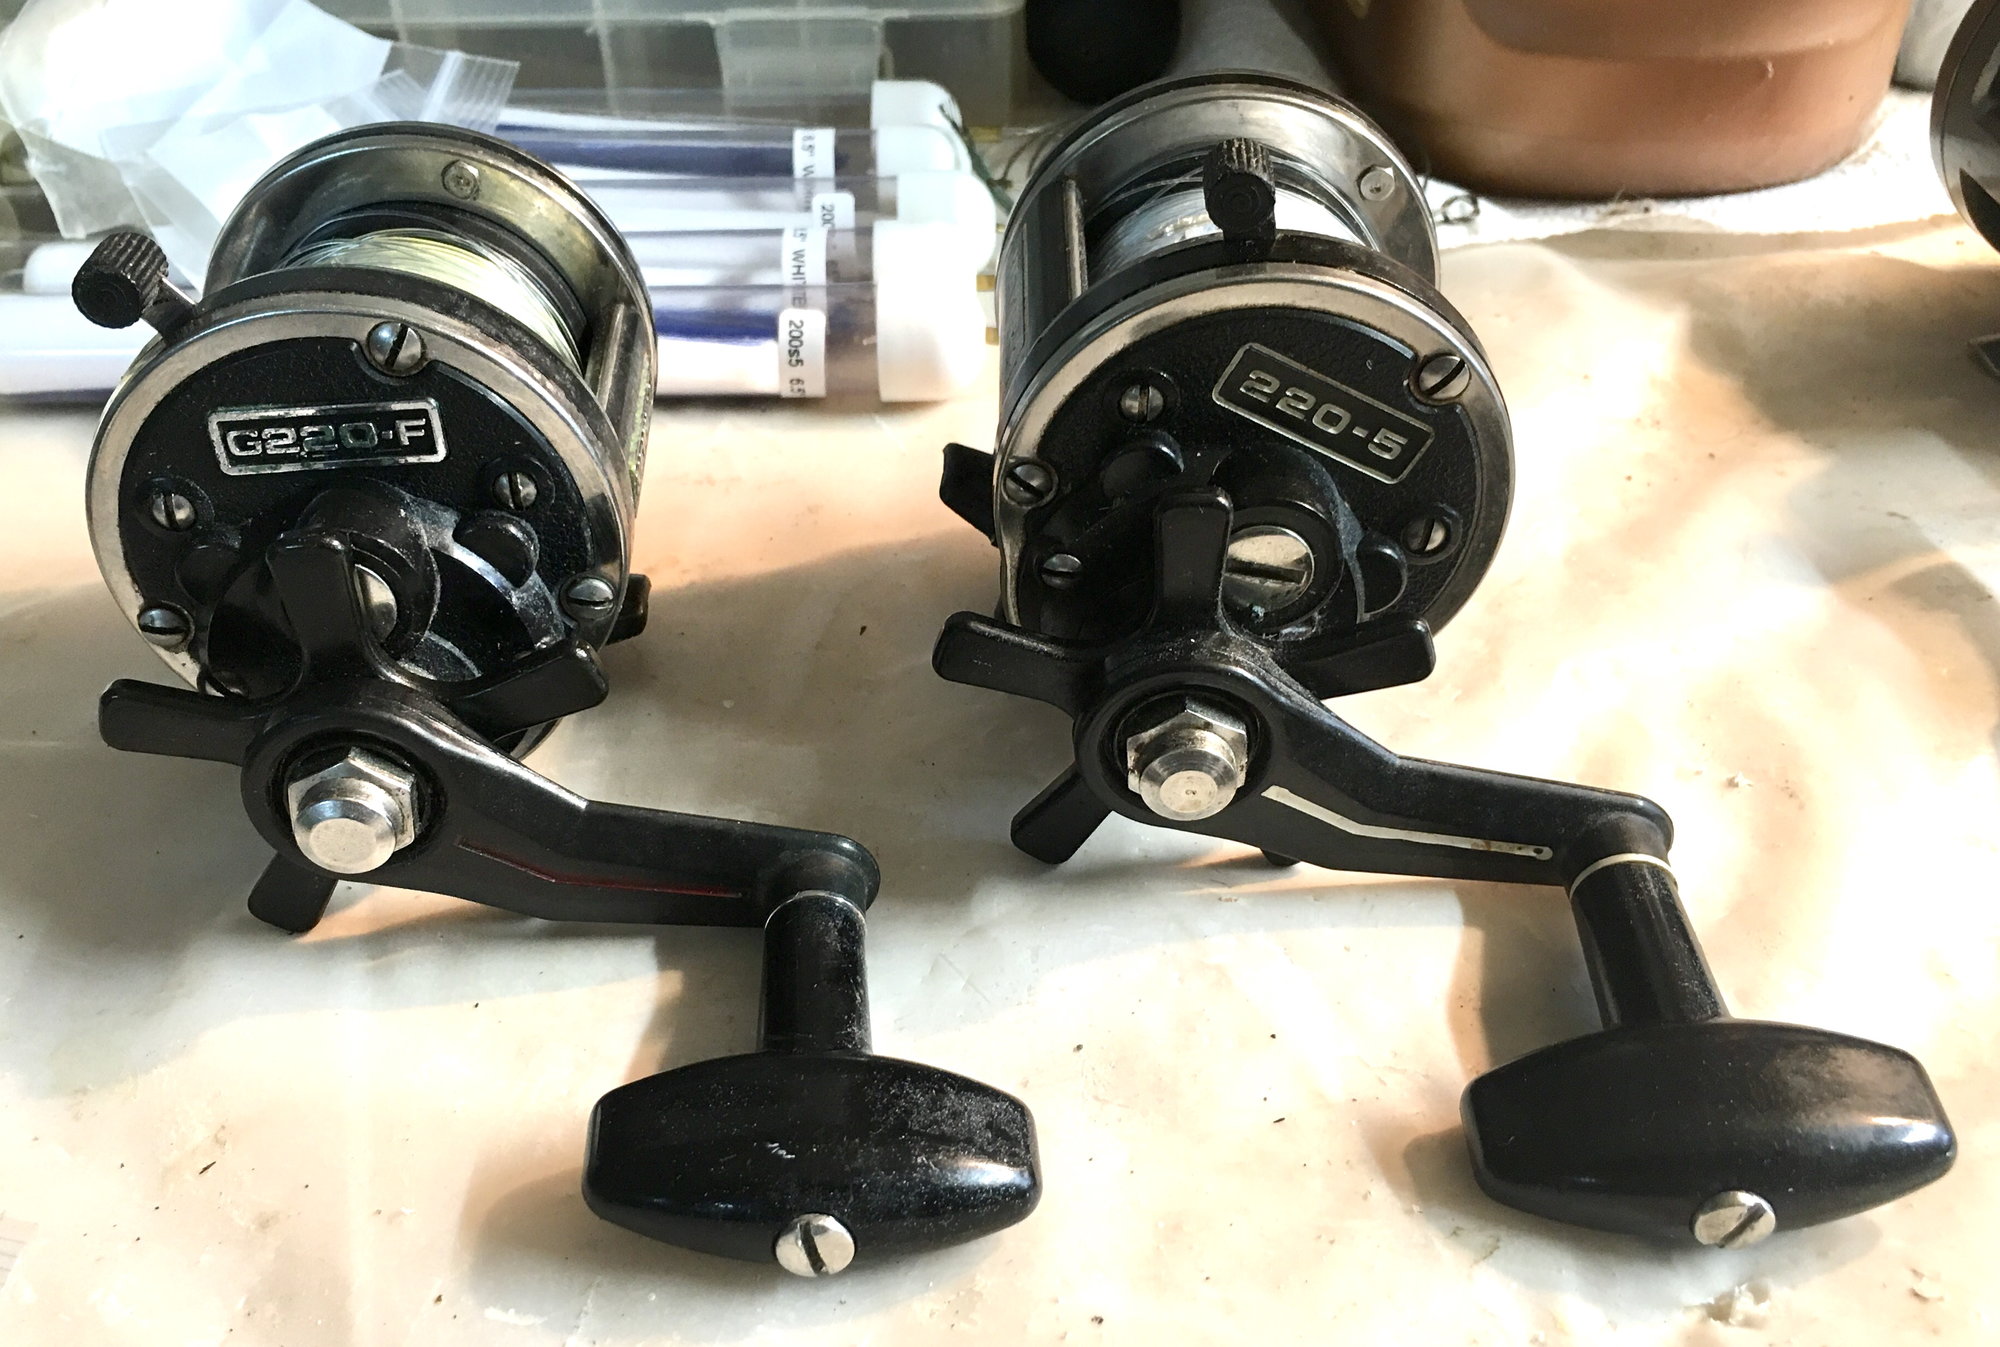 Newell Reels Set of 5 $700 - The Hull Truth - Boating and Fishing Forum